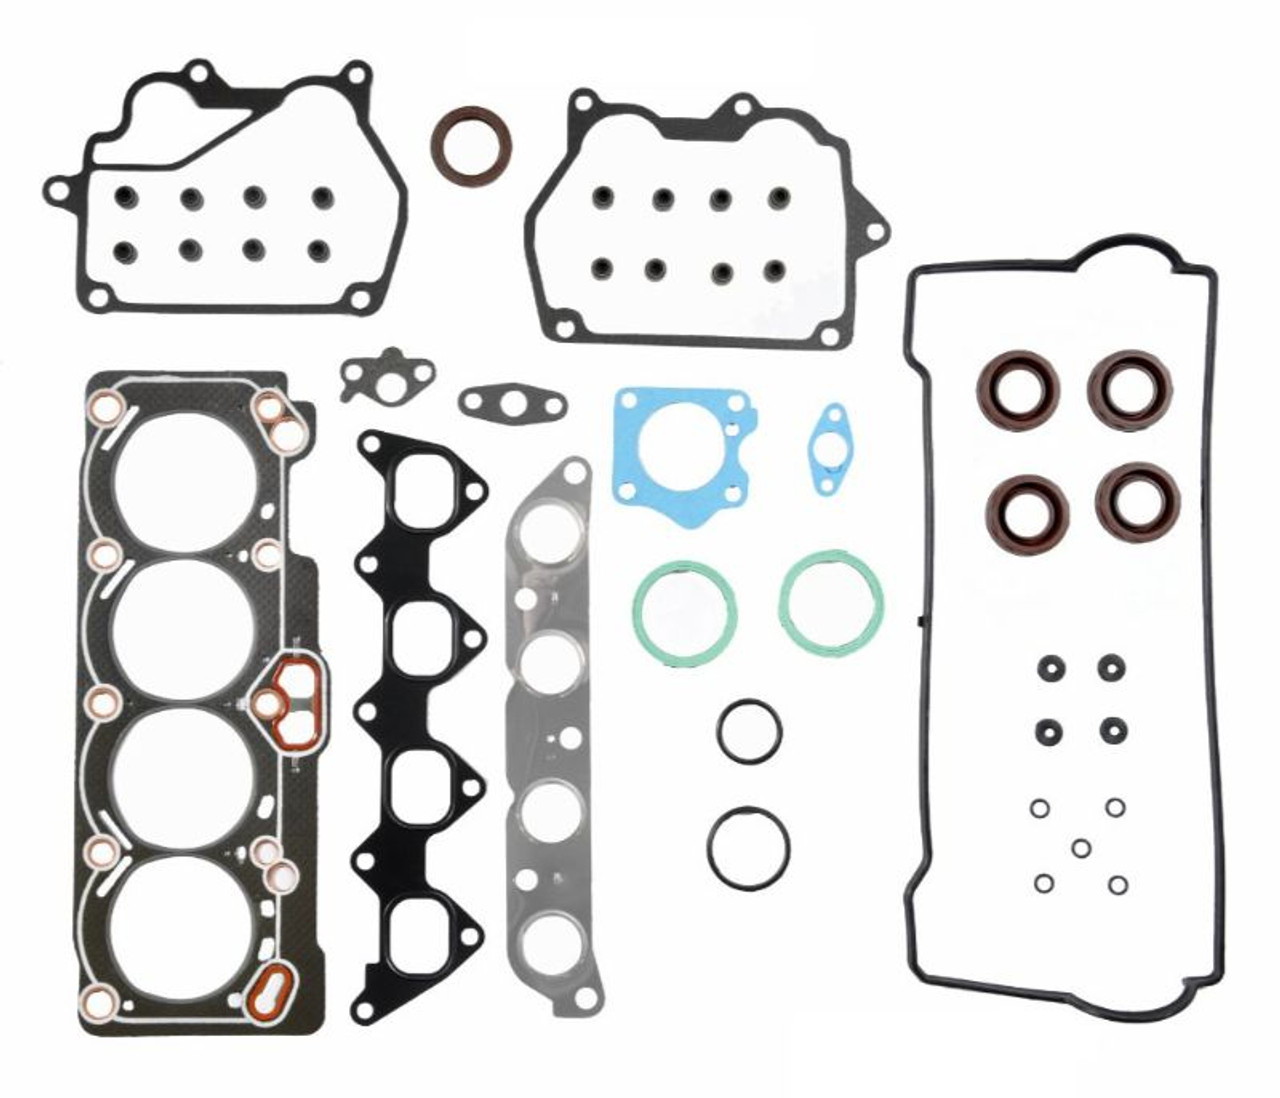 1995 Toyota Corolla 1.6L Engine Cylinder Head Gasket Set TO1.6HS-D -7